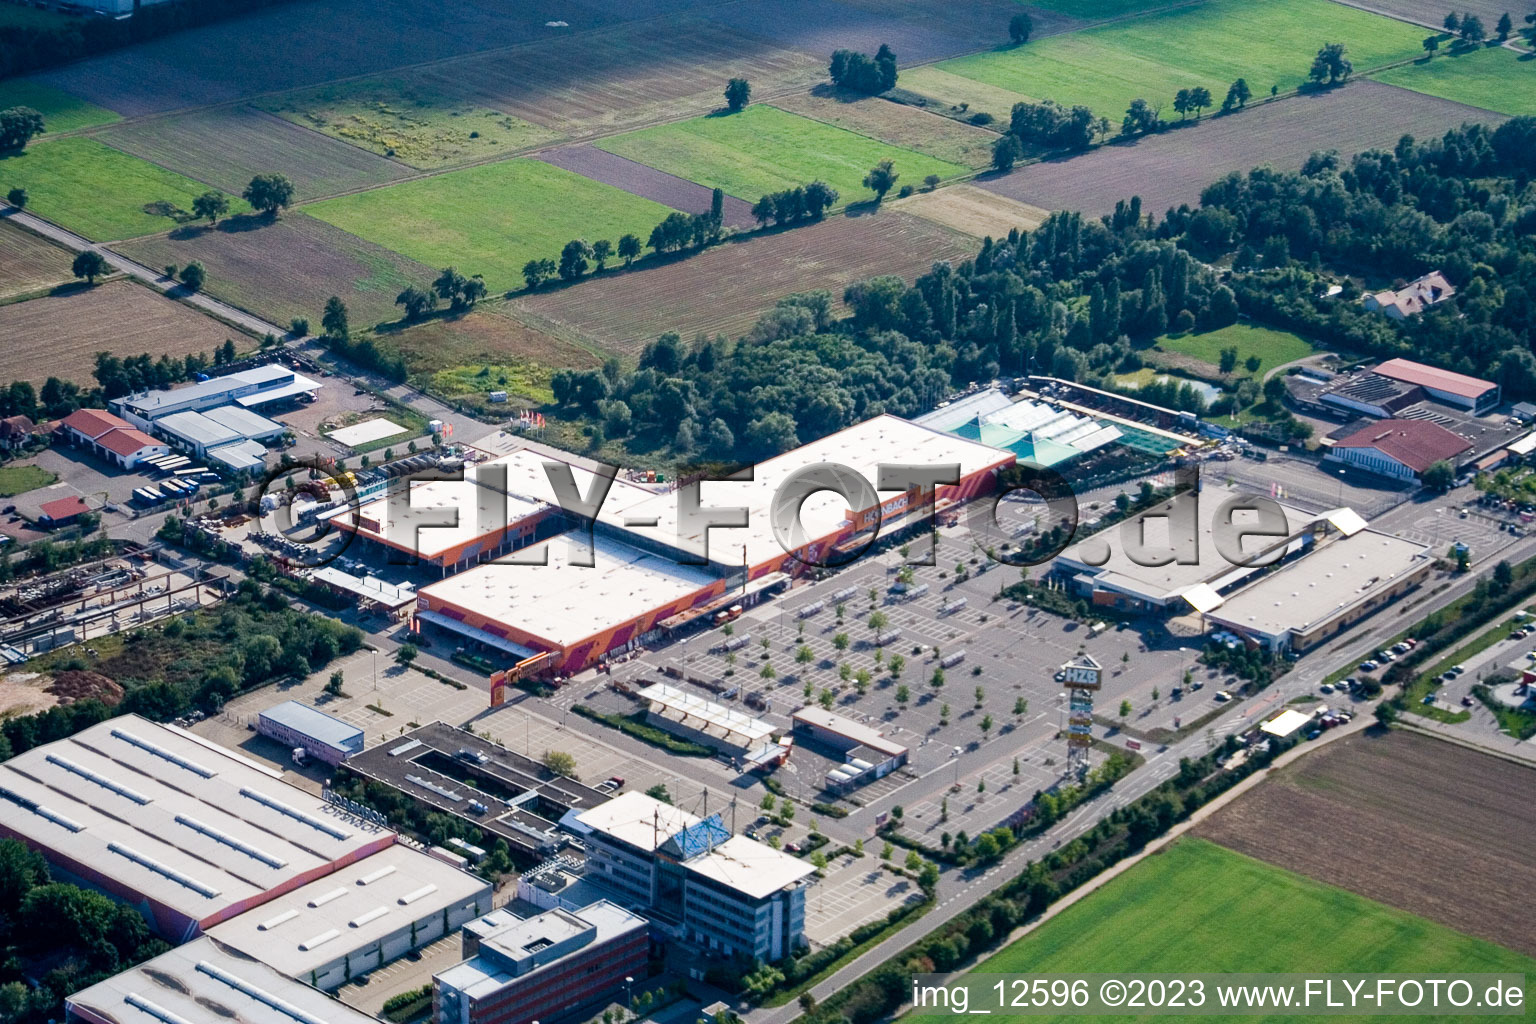 Aerial view of Hornbach hardware store in the Bruchwiesenstr industrial area in Bornheim in the state Rhineland-Palatinate, Germany